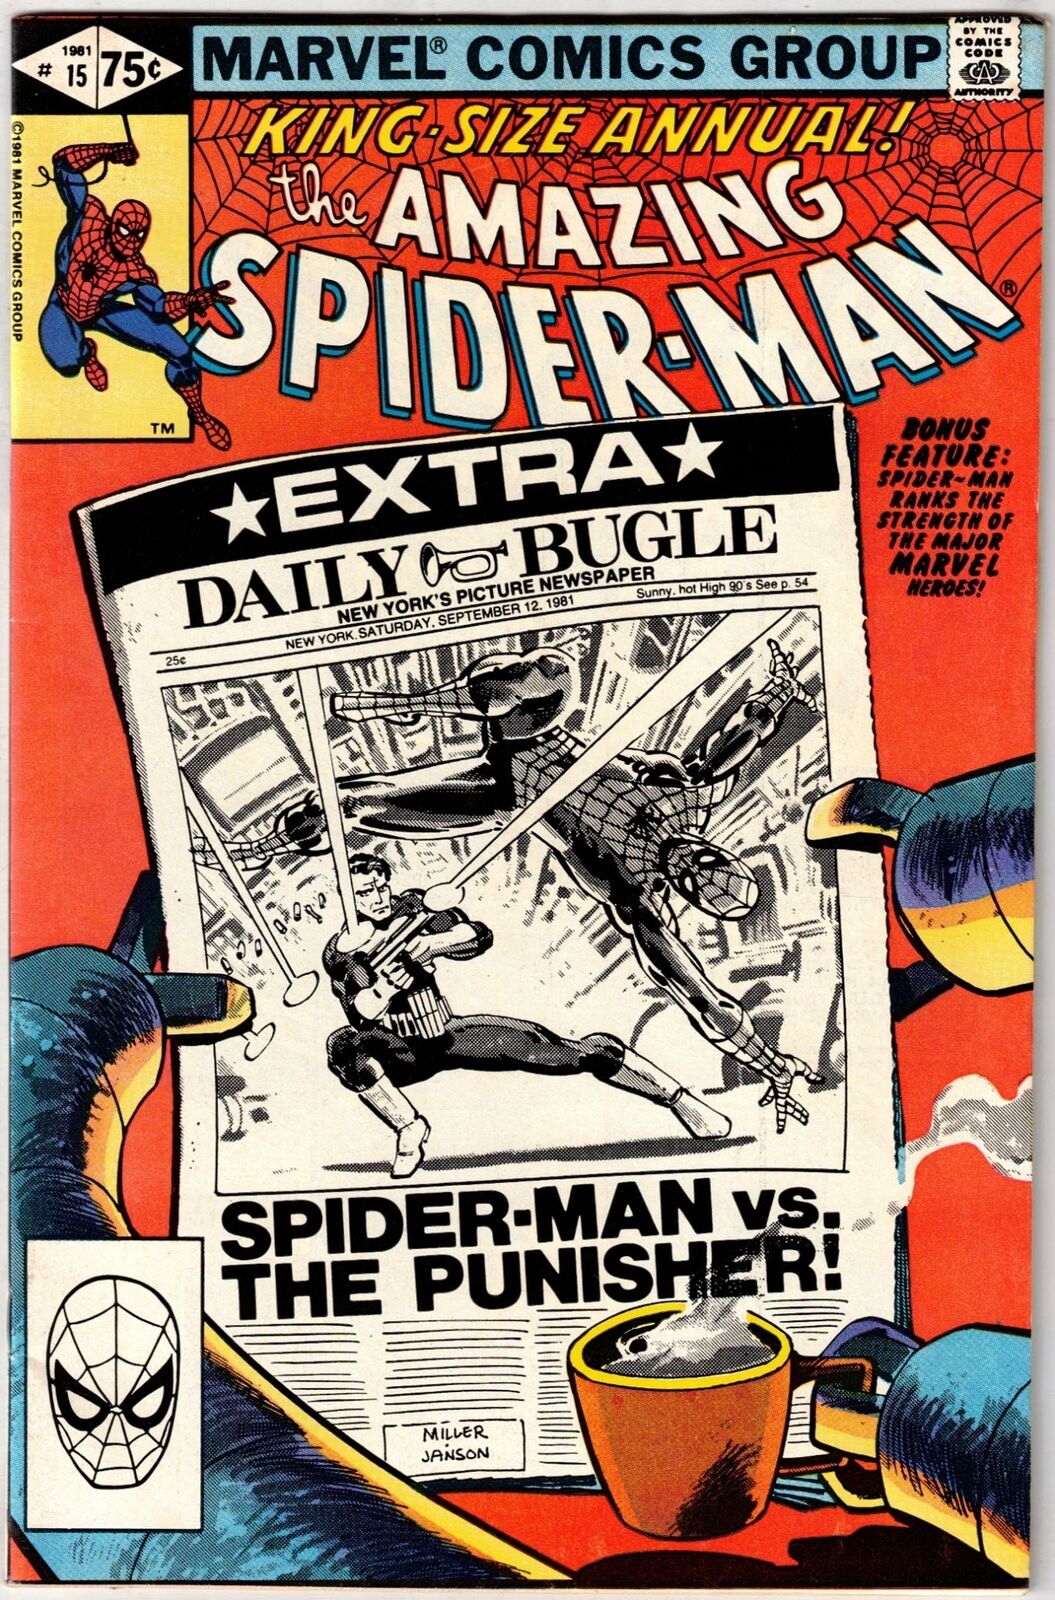 AMAZING SPIDER-MAN ANNUAL #15 (1981)- EARLY FRANK MILLER PINISHER COVER- FINE